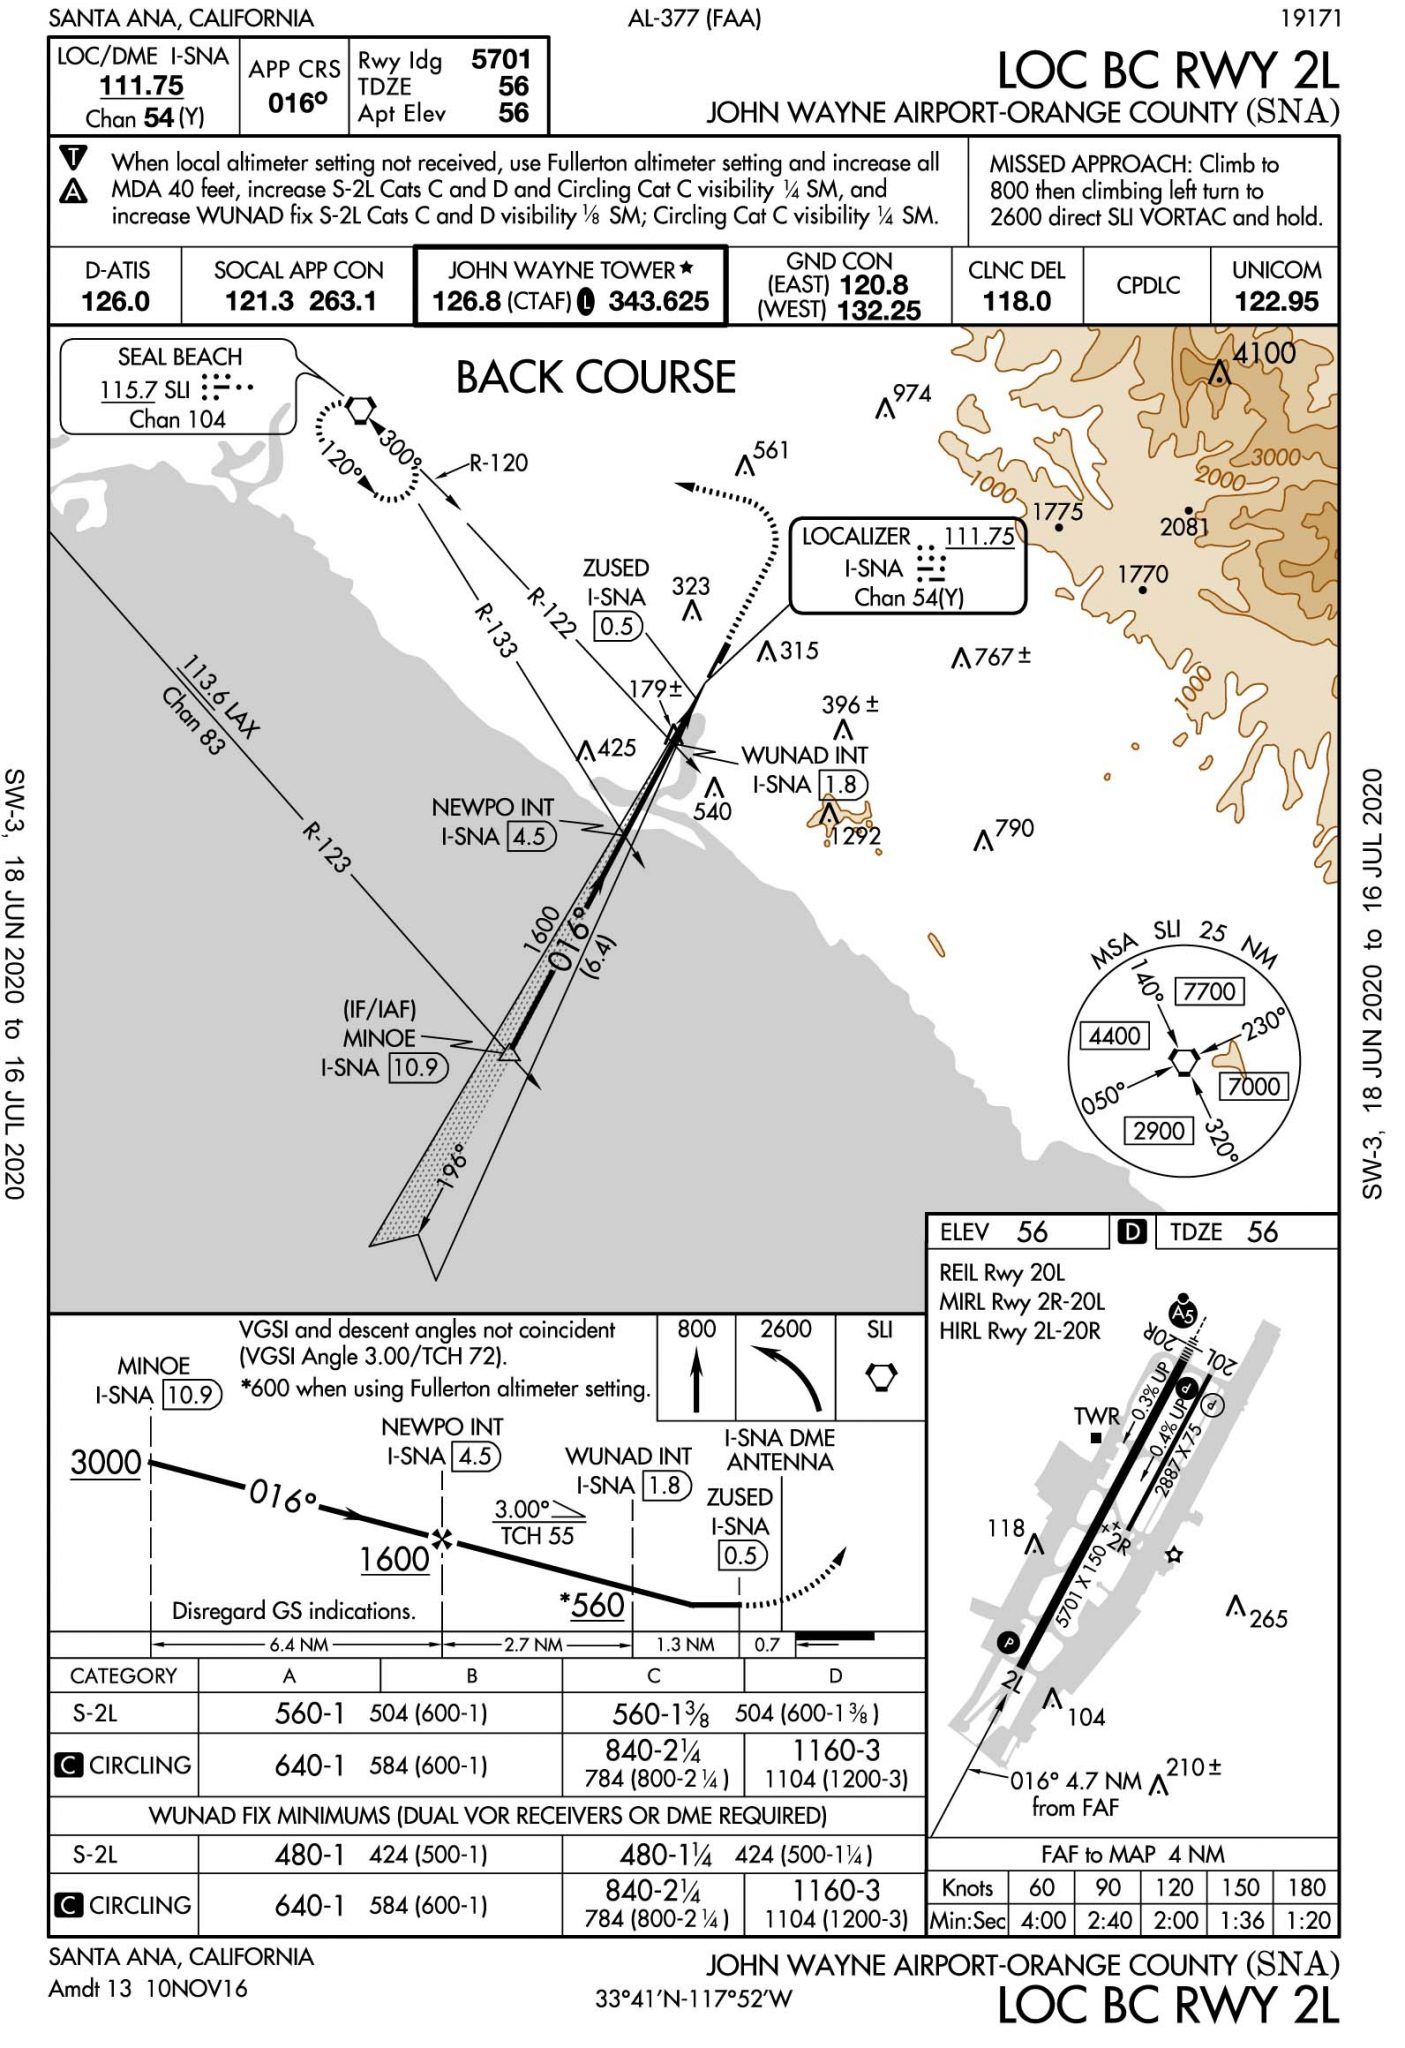 localizer back course airports